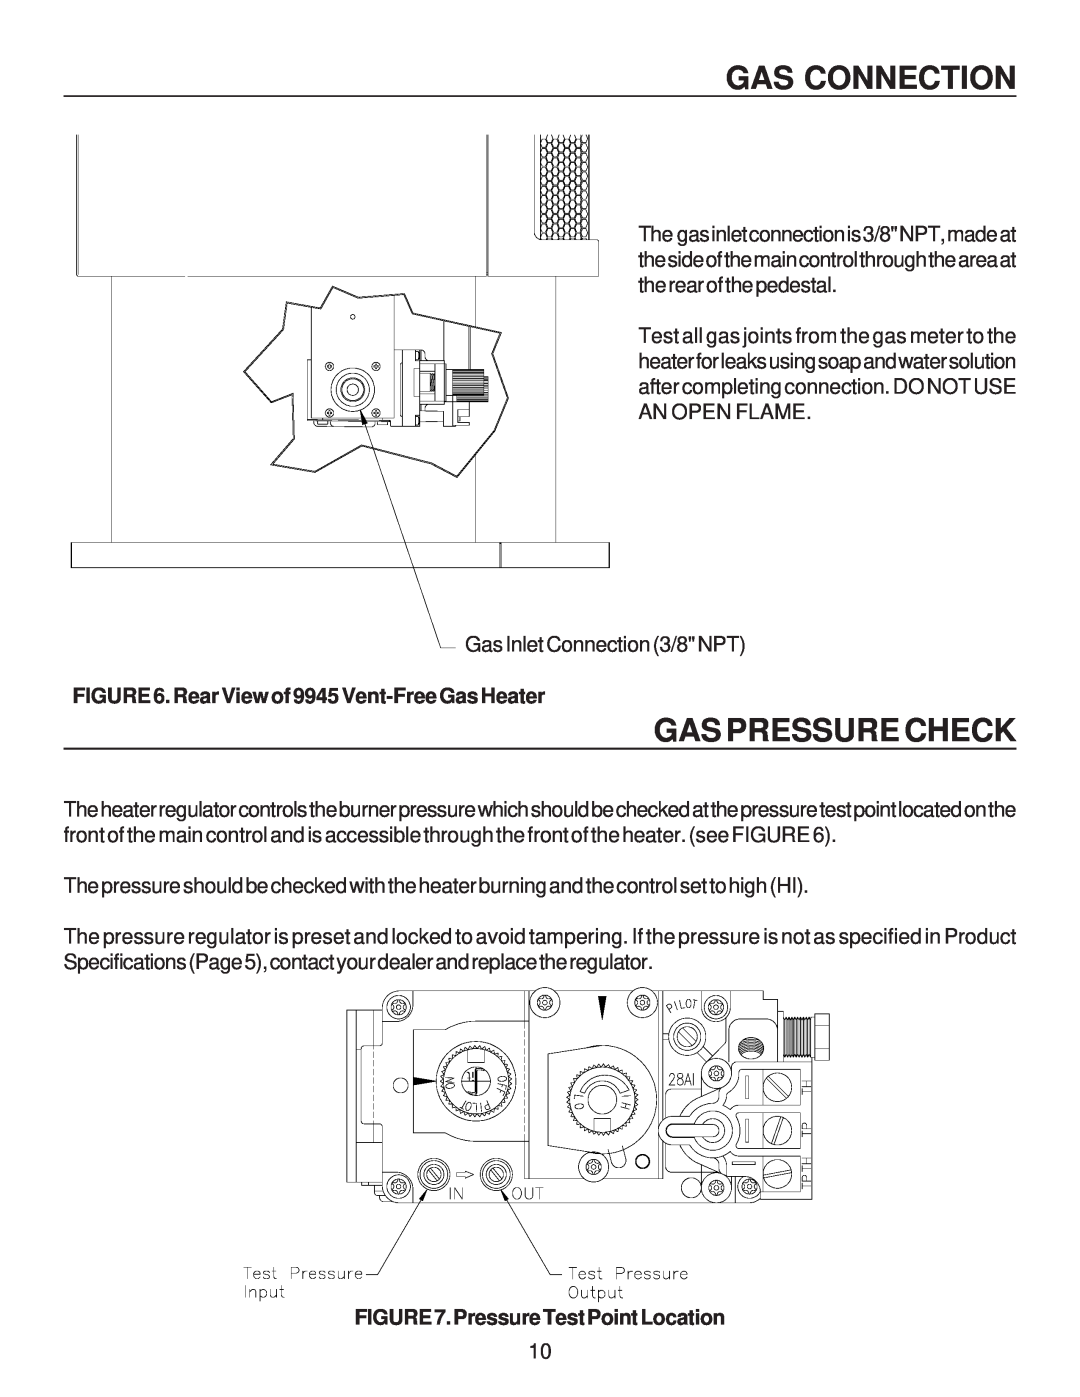 United States Stove B9945L manual Gas Pressure Check, Rear View of 9945 Vent-FreeGas Heater, Pressure Test Point Location 